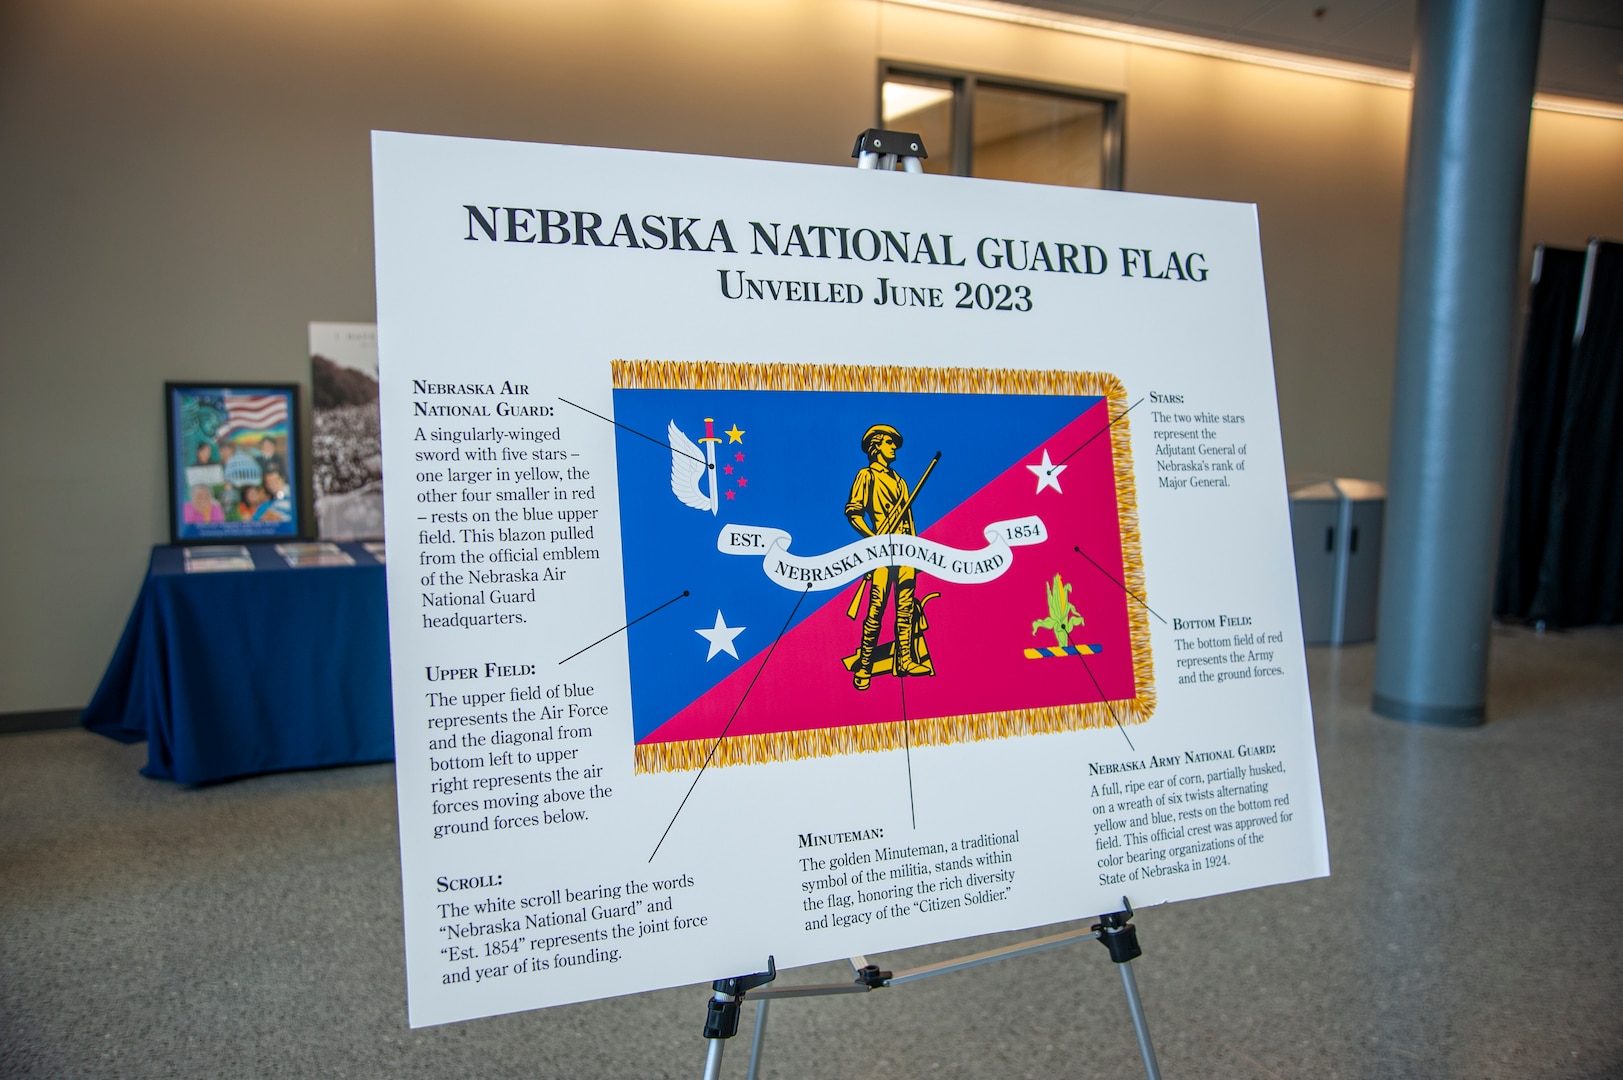 The Nebraska National Guard unveils a new flag, June 2, 2023, during a ceremony at the Joint Force Headquarters in Lincoln, Nebraska.